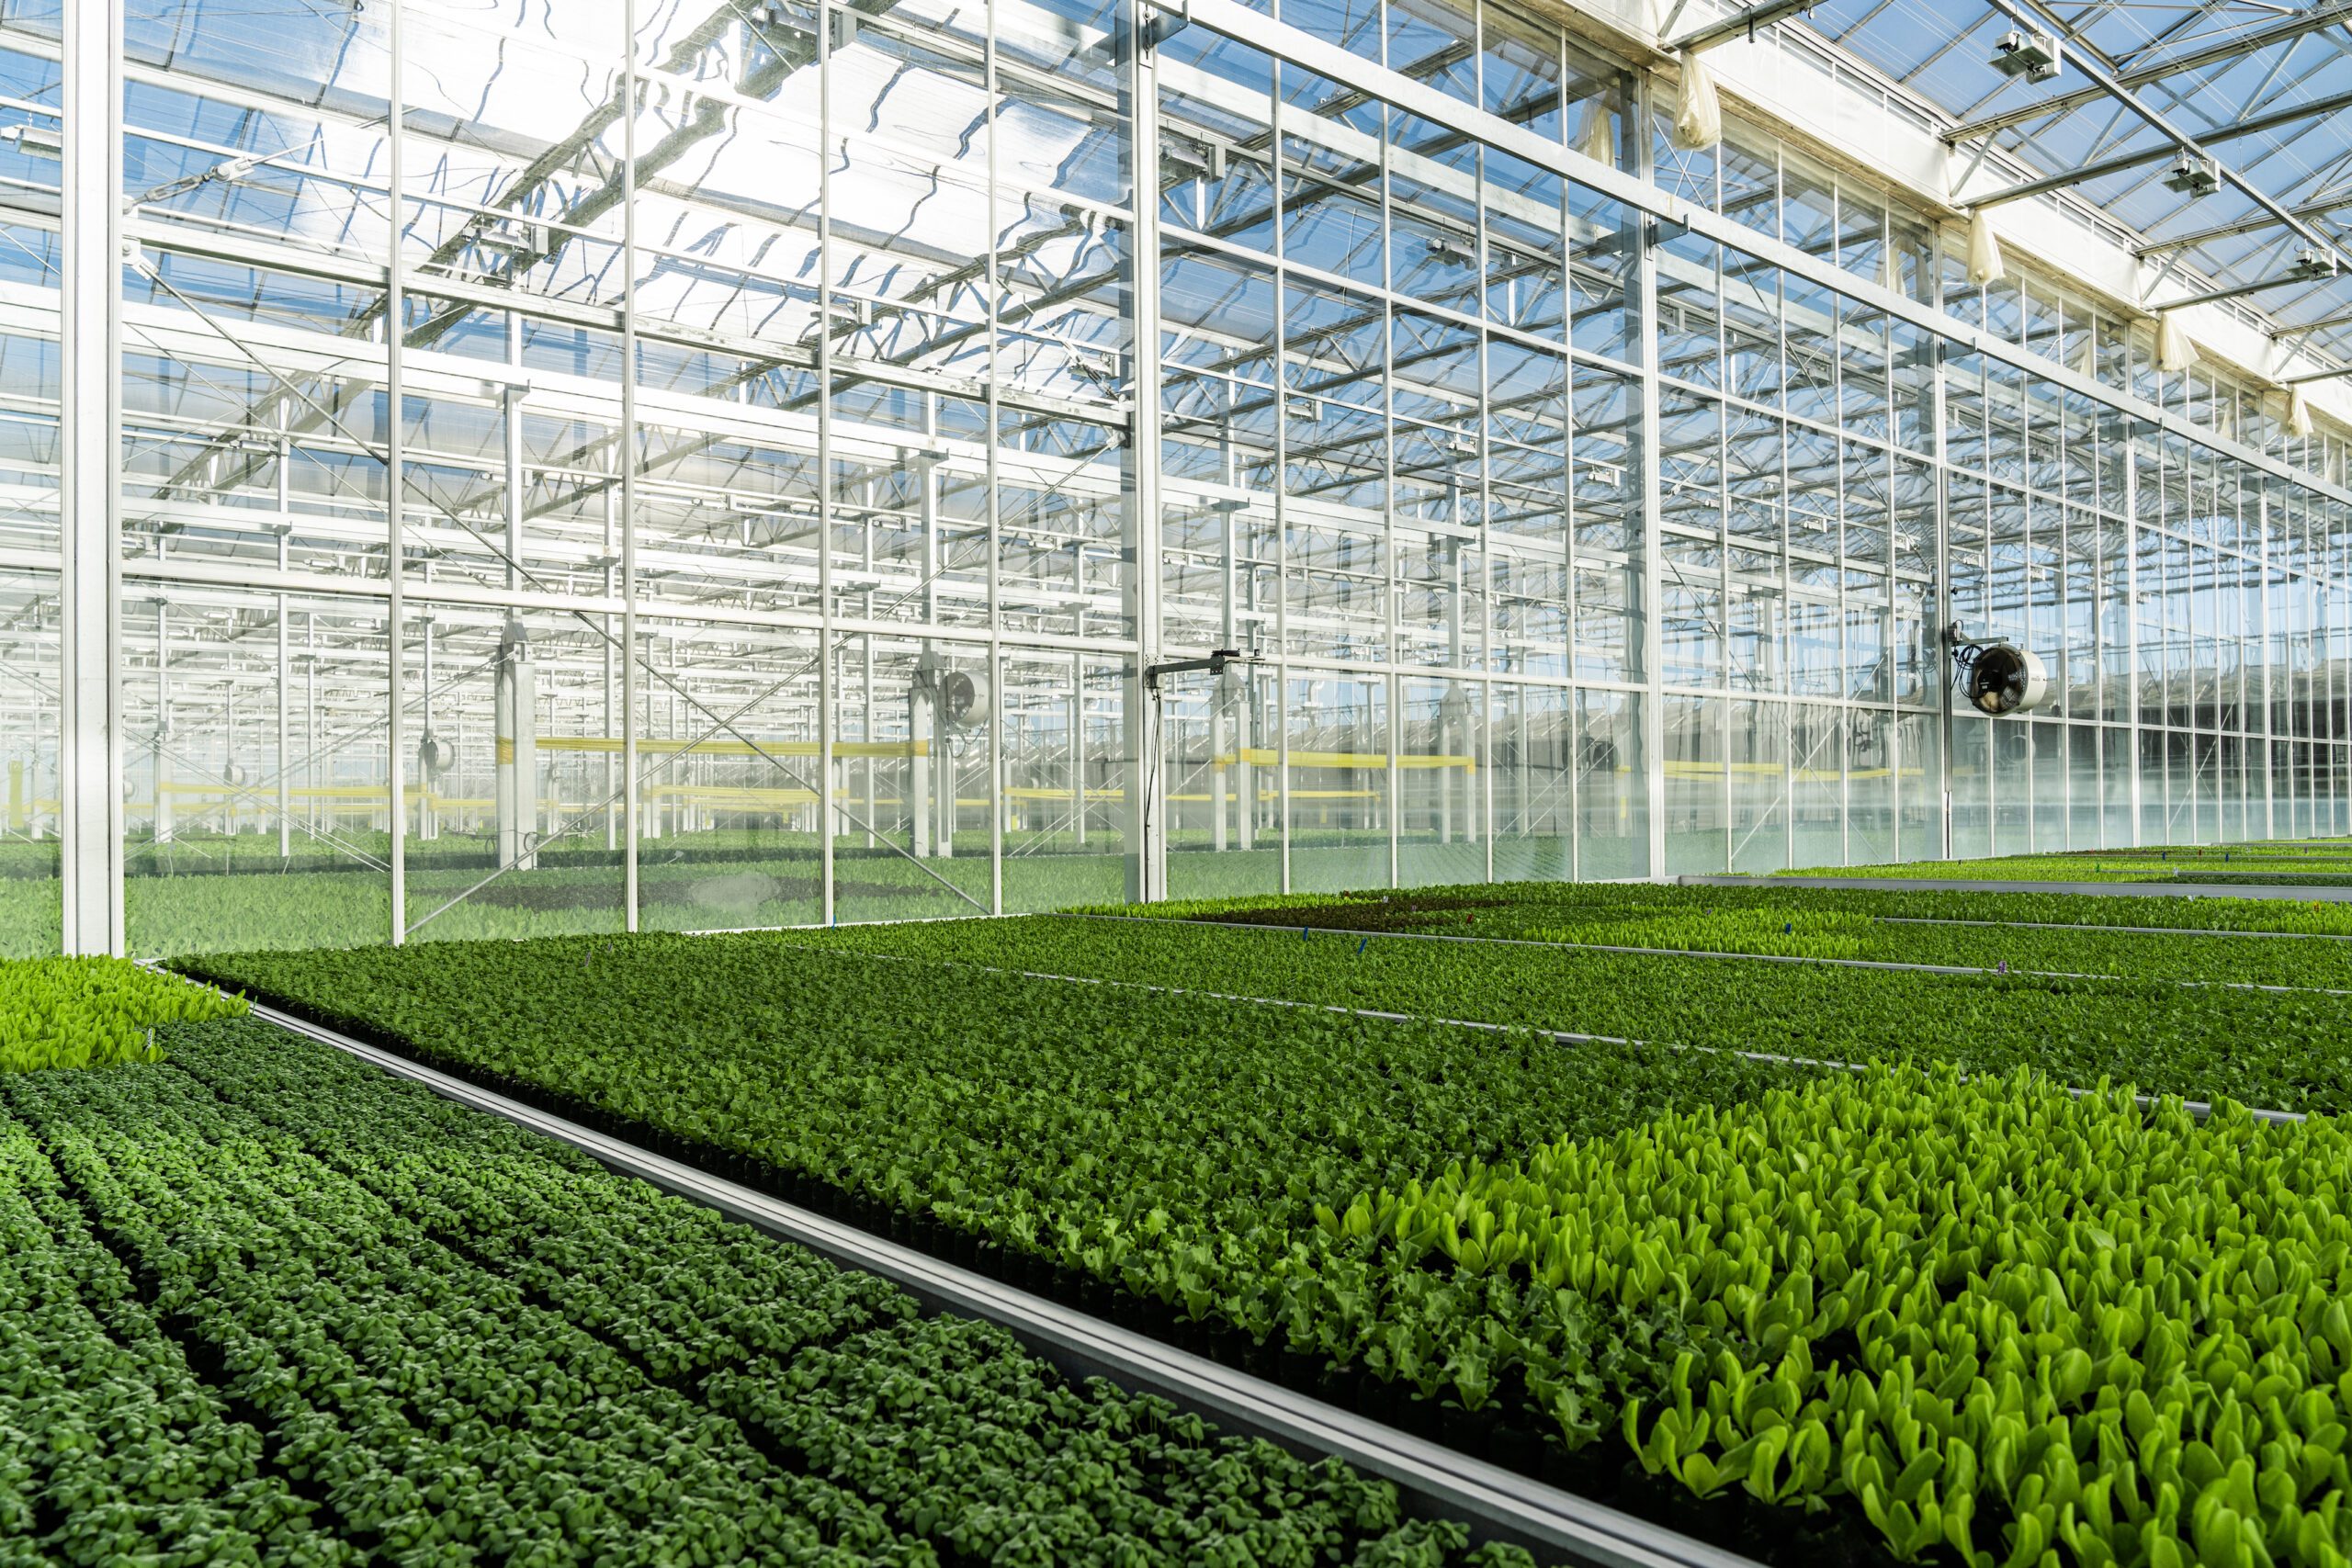 Gotham Greens Indoor Hydroponic Farm with Sunlight pouring through glass ceiling